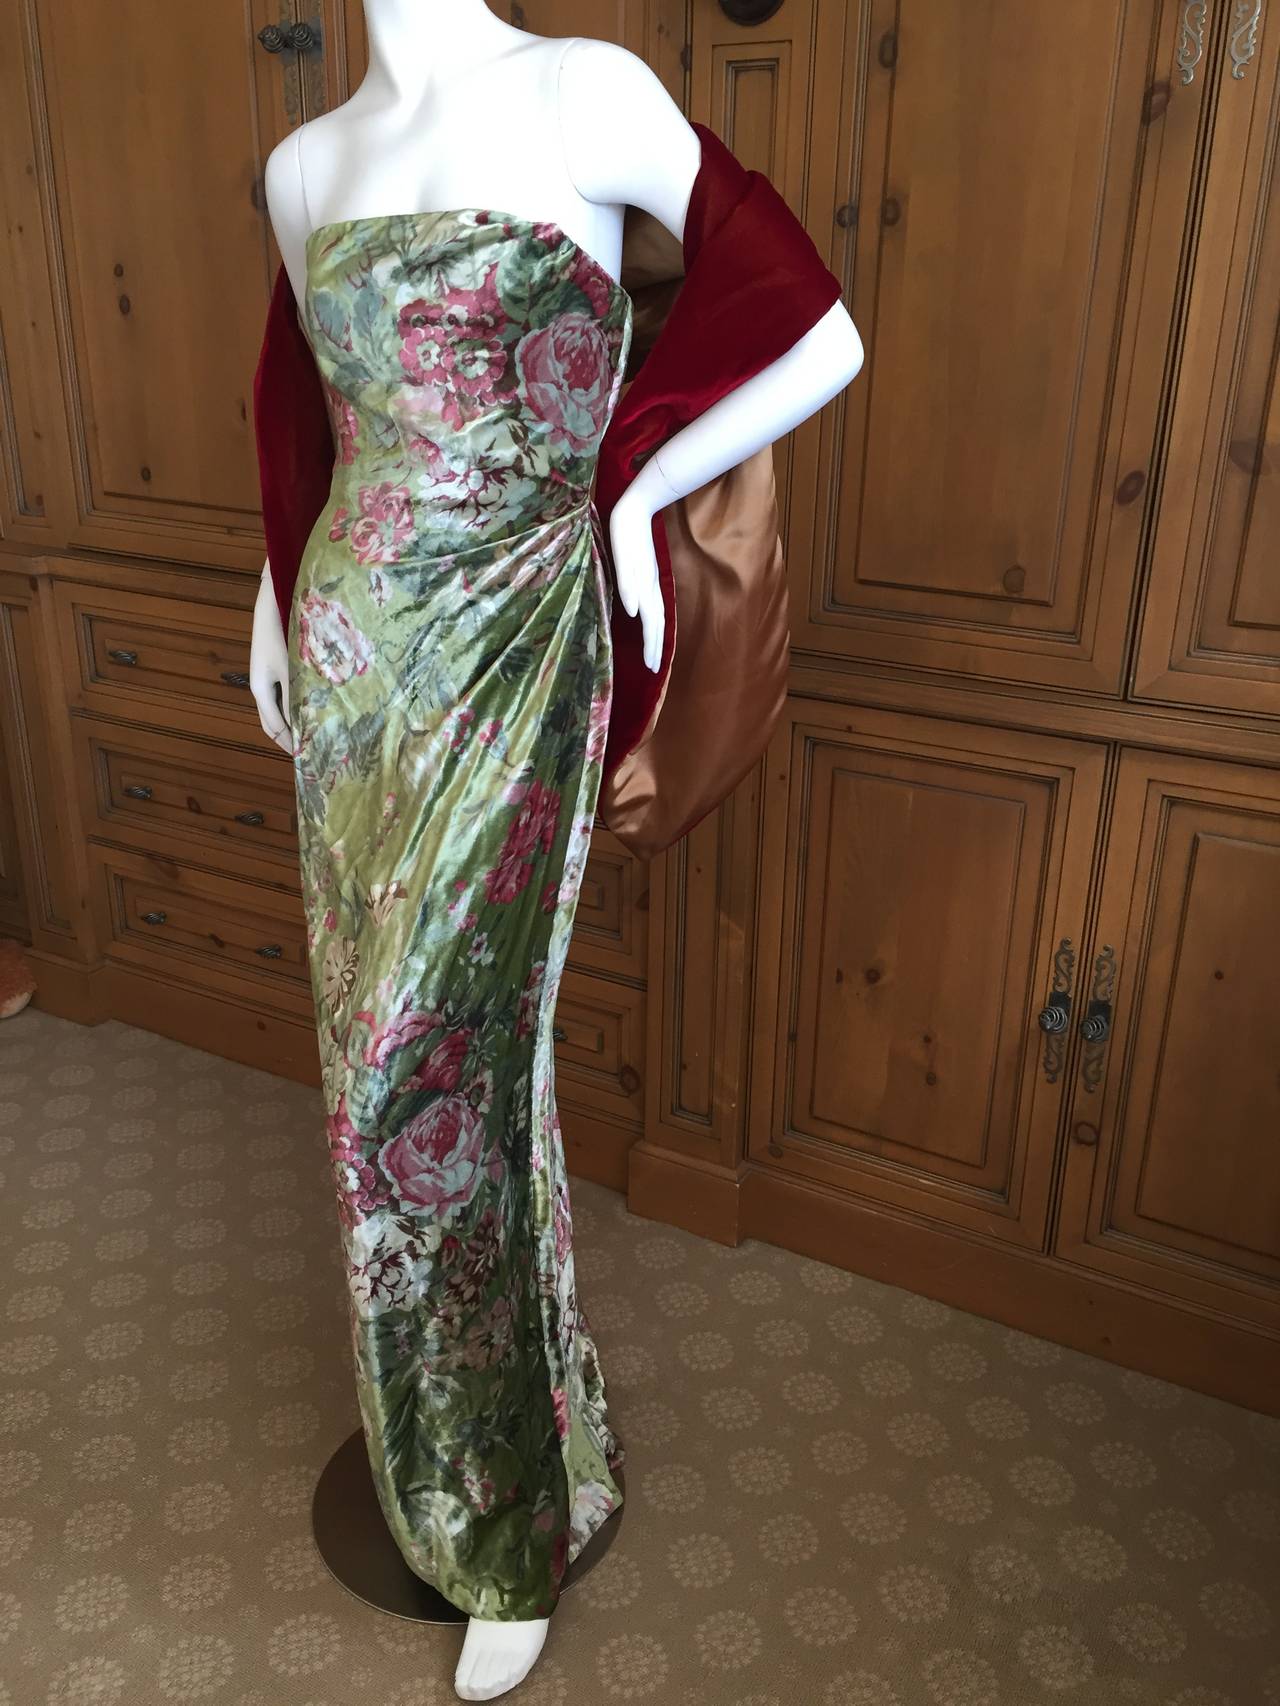 Bill Blass 1970's Elegant Floral Silk Velvet Strapless Dress with Shawl
Built in boned corset, lined in silk. There is a slight train.
This is the most luxurious silk velvet, with a very reflective sheen, much prettier in person.
The shawl that